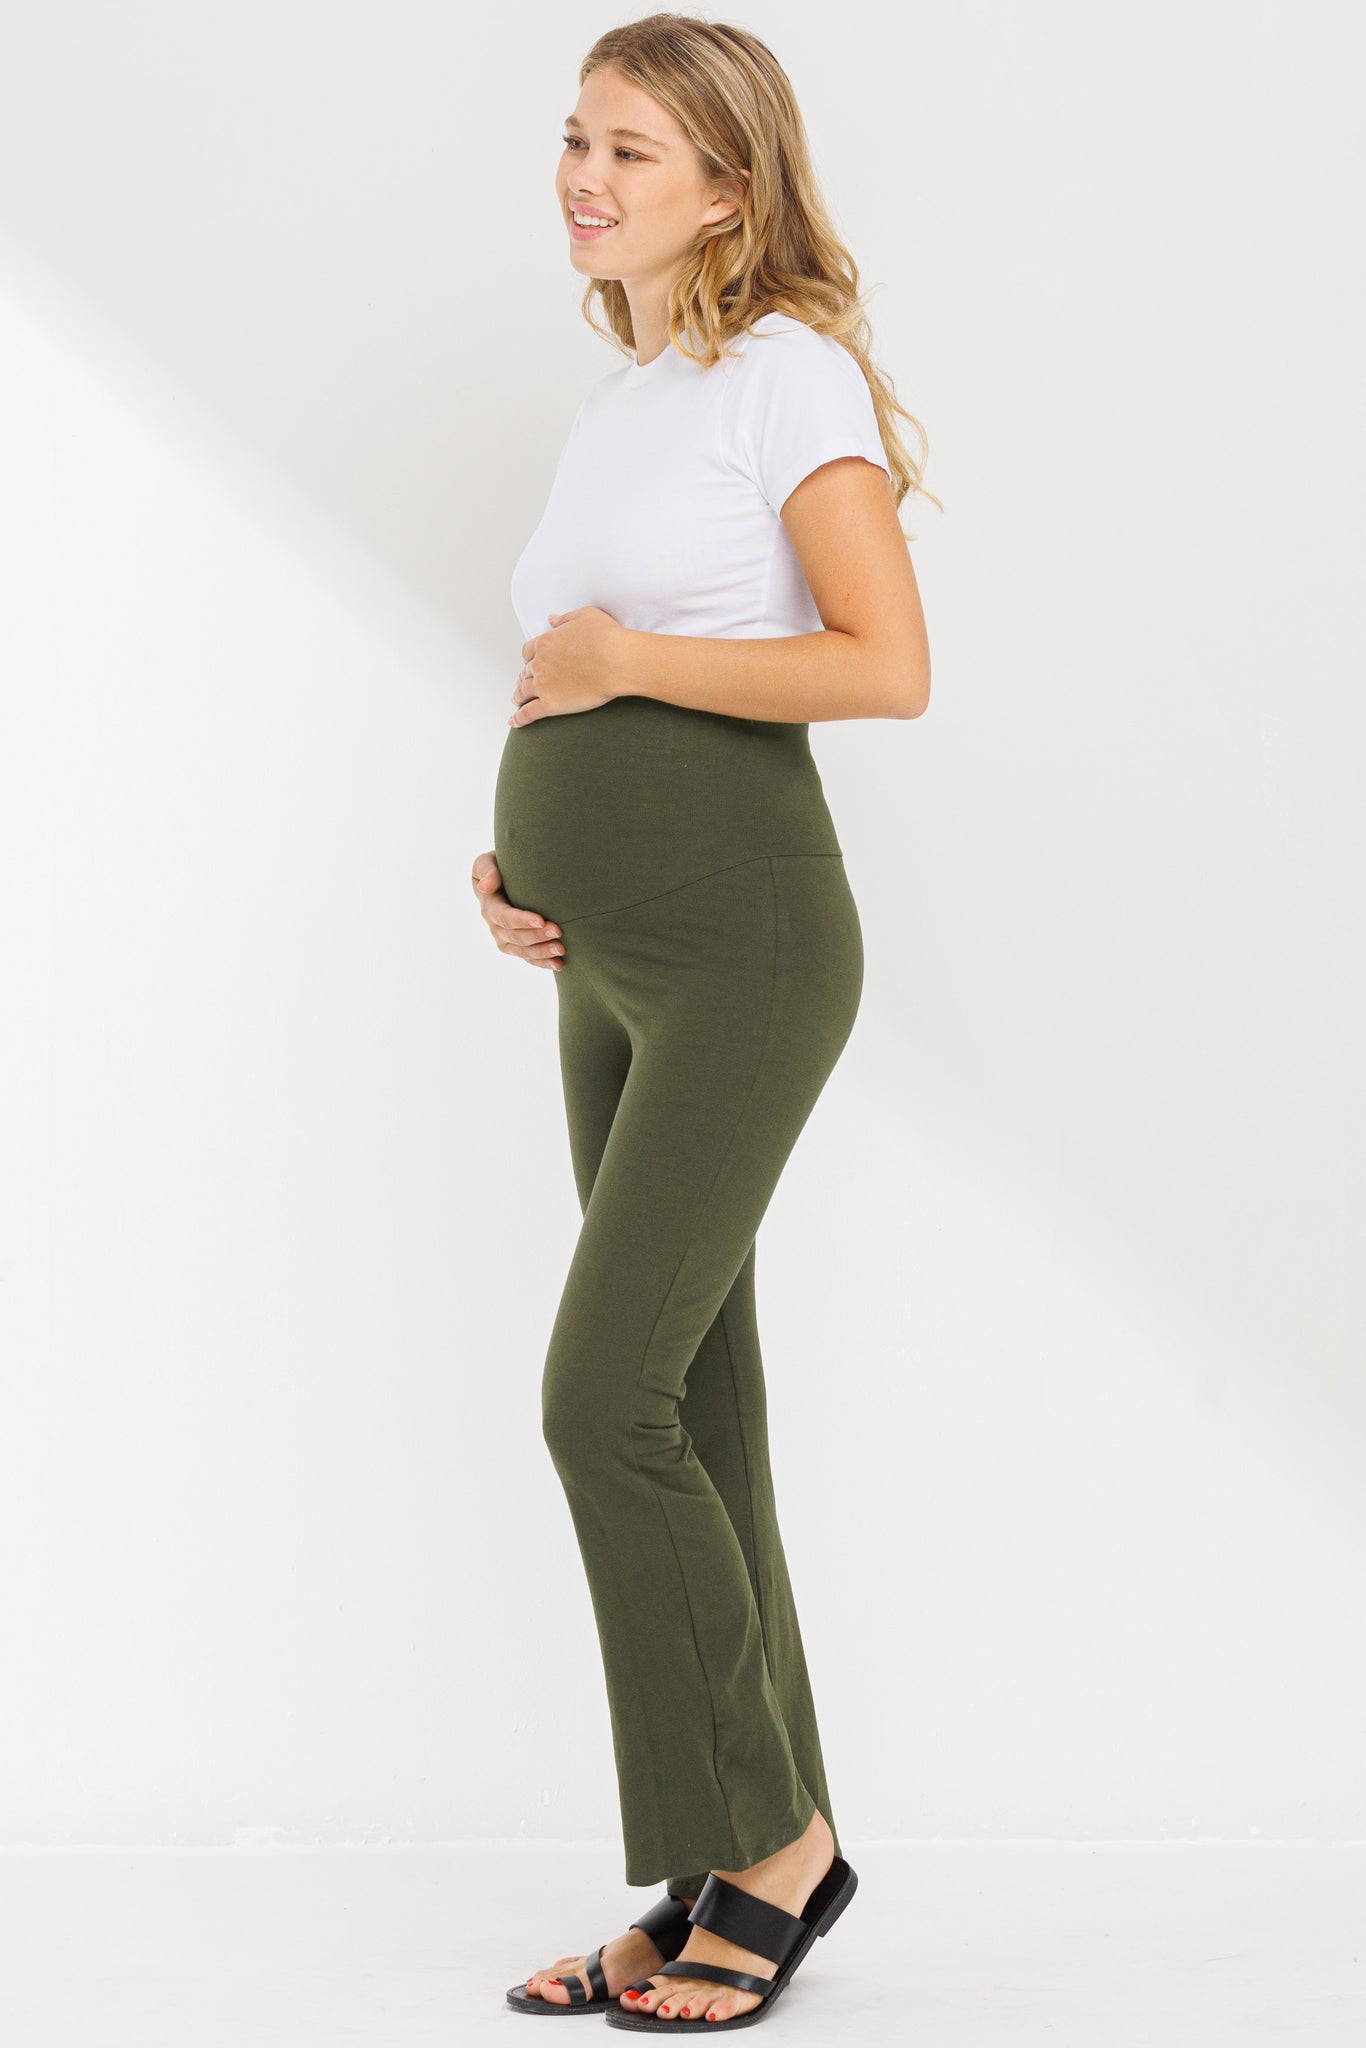 My Bump High Waisted Fold Over Belly Lounge Yoga Maternity Pants